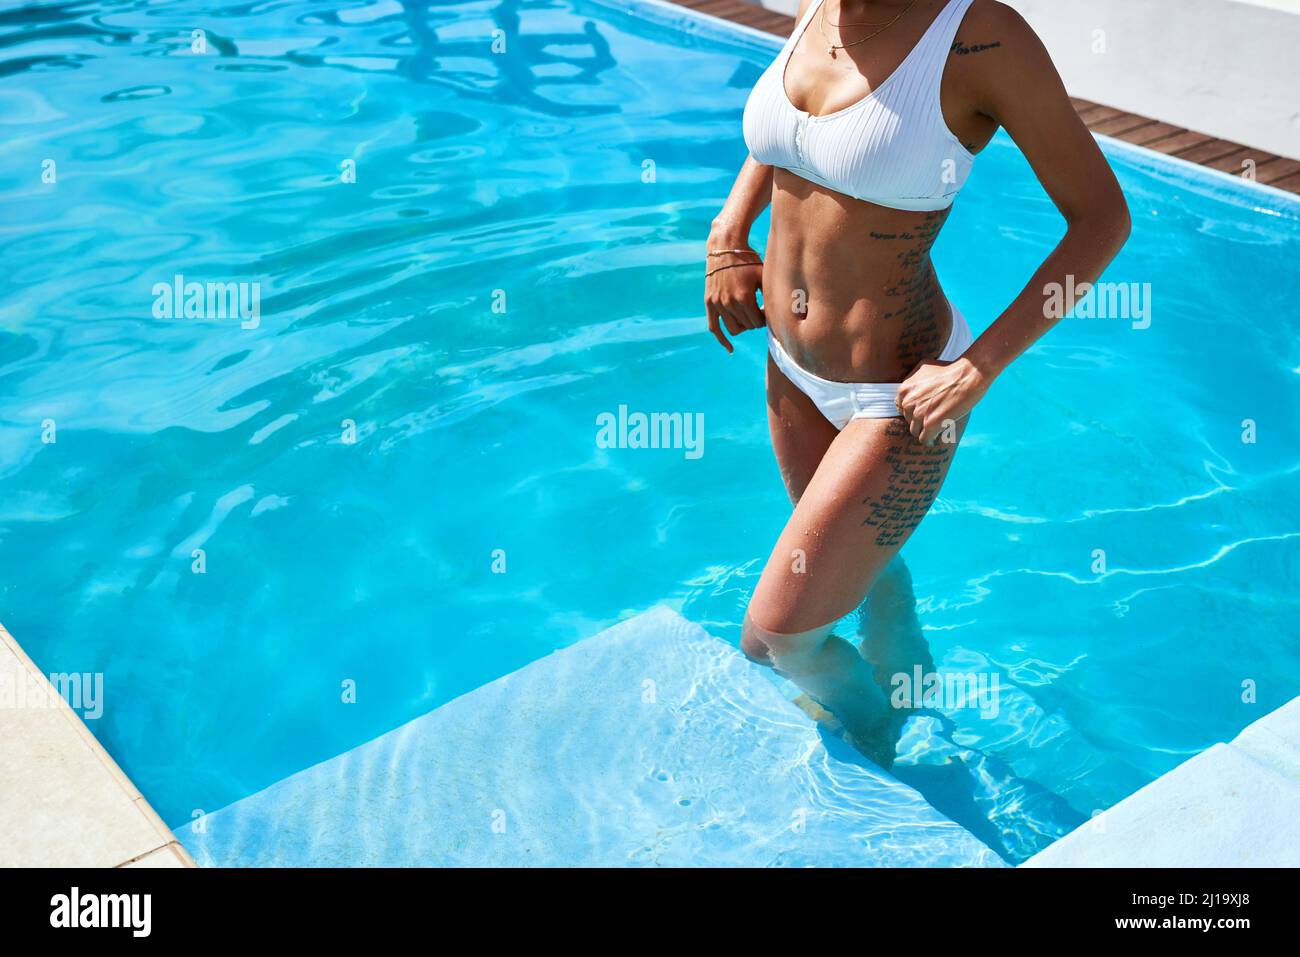 A dip in the pool will make all your worries go away. Cropped shot of an unrecognizable woman standing in a swimming pool. Stock Photo